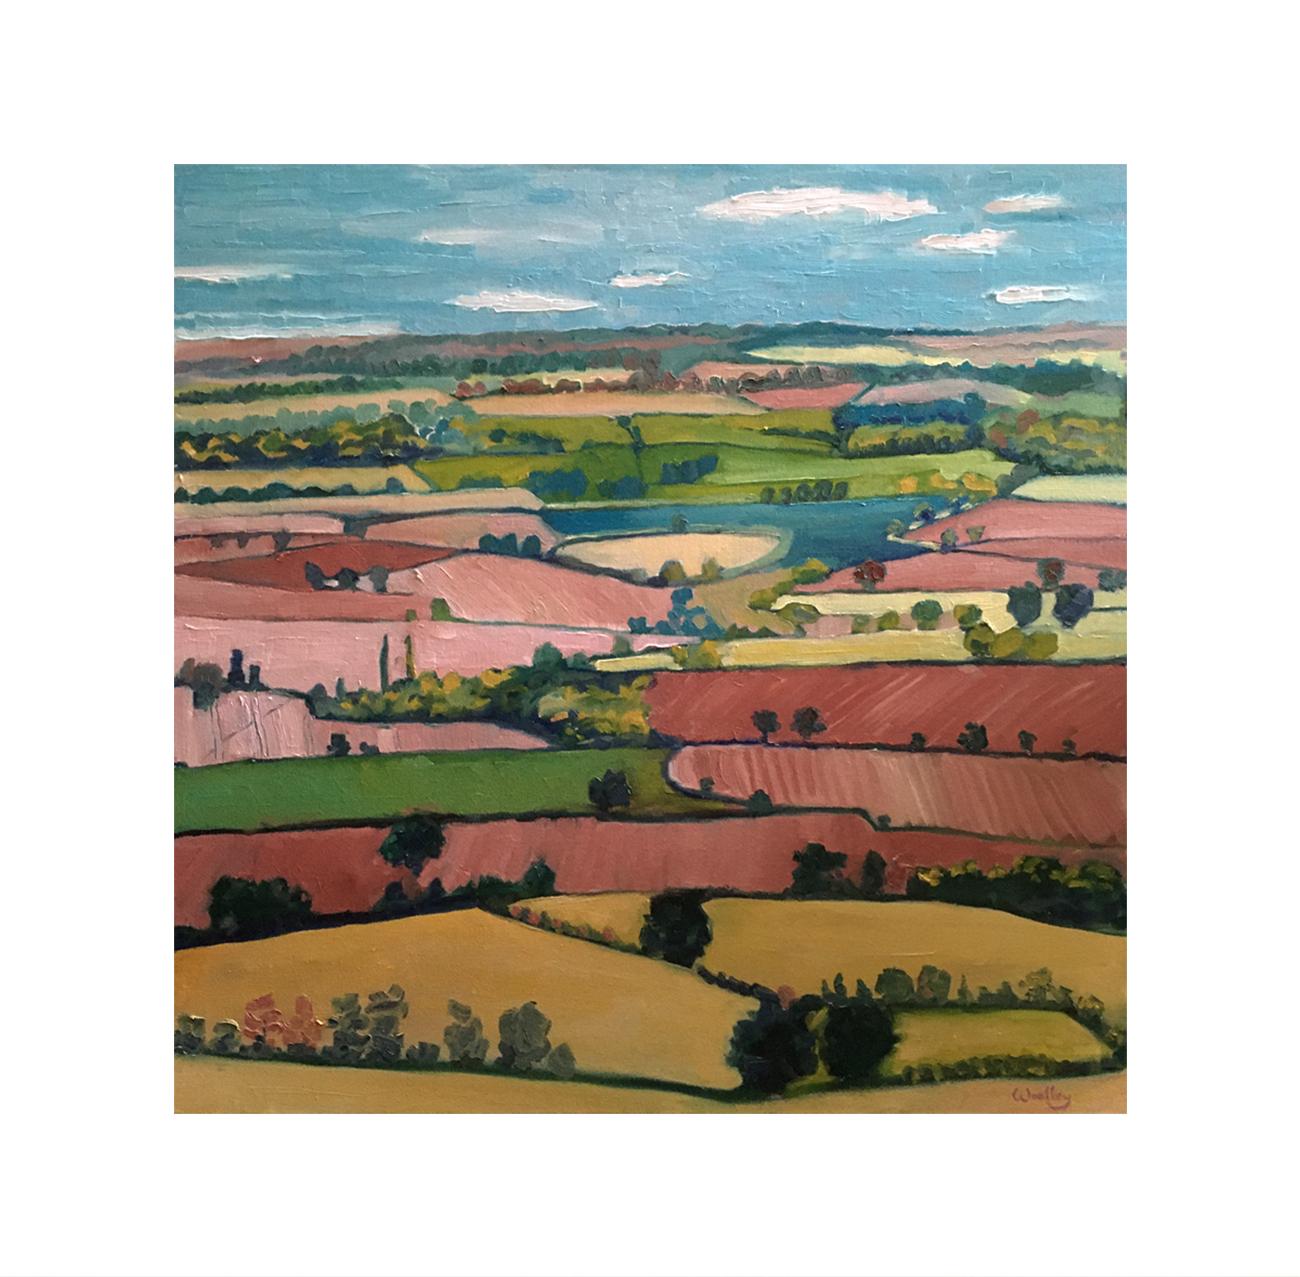 From the Tyndale Monument is an Original oil painting by Eleanor Woolley. This painting was started Plein air and finished in the studio. Looking down on the landscape from the Monument the Artists has captured the feeling of the Cotswold fields,